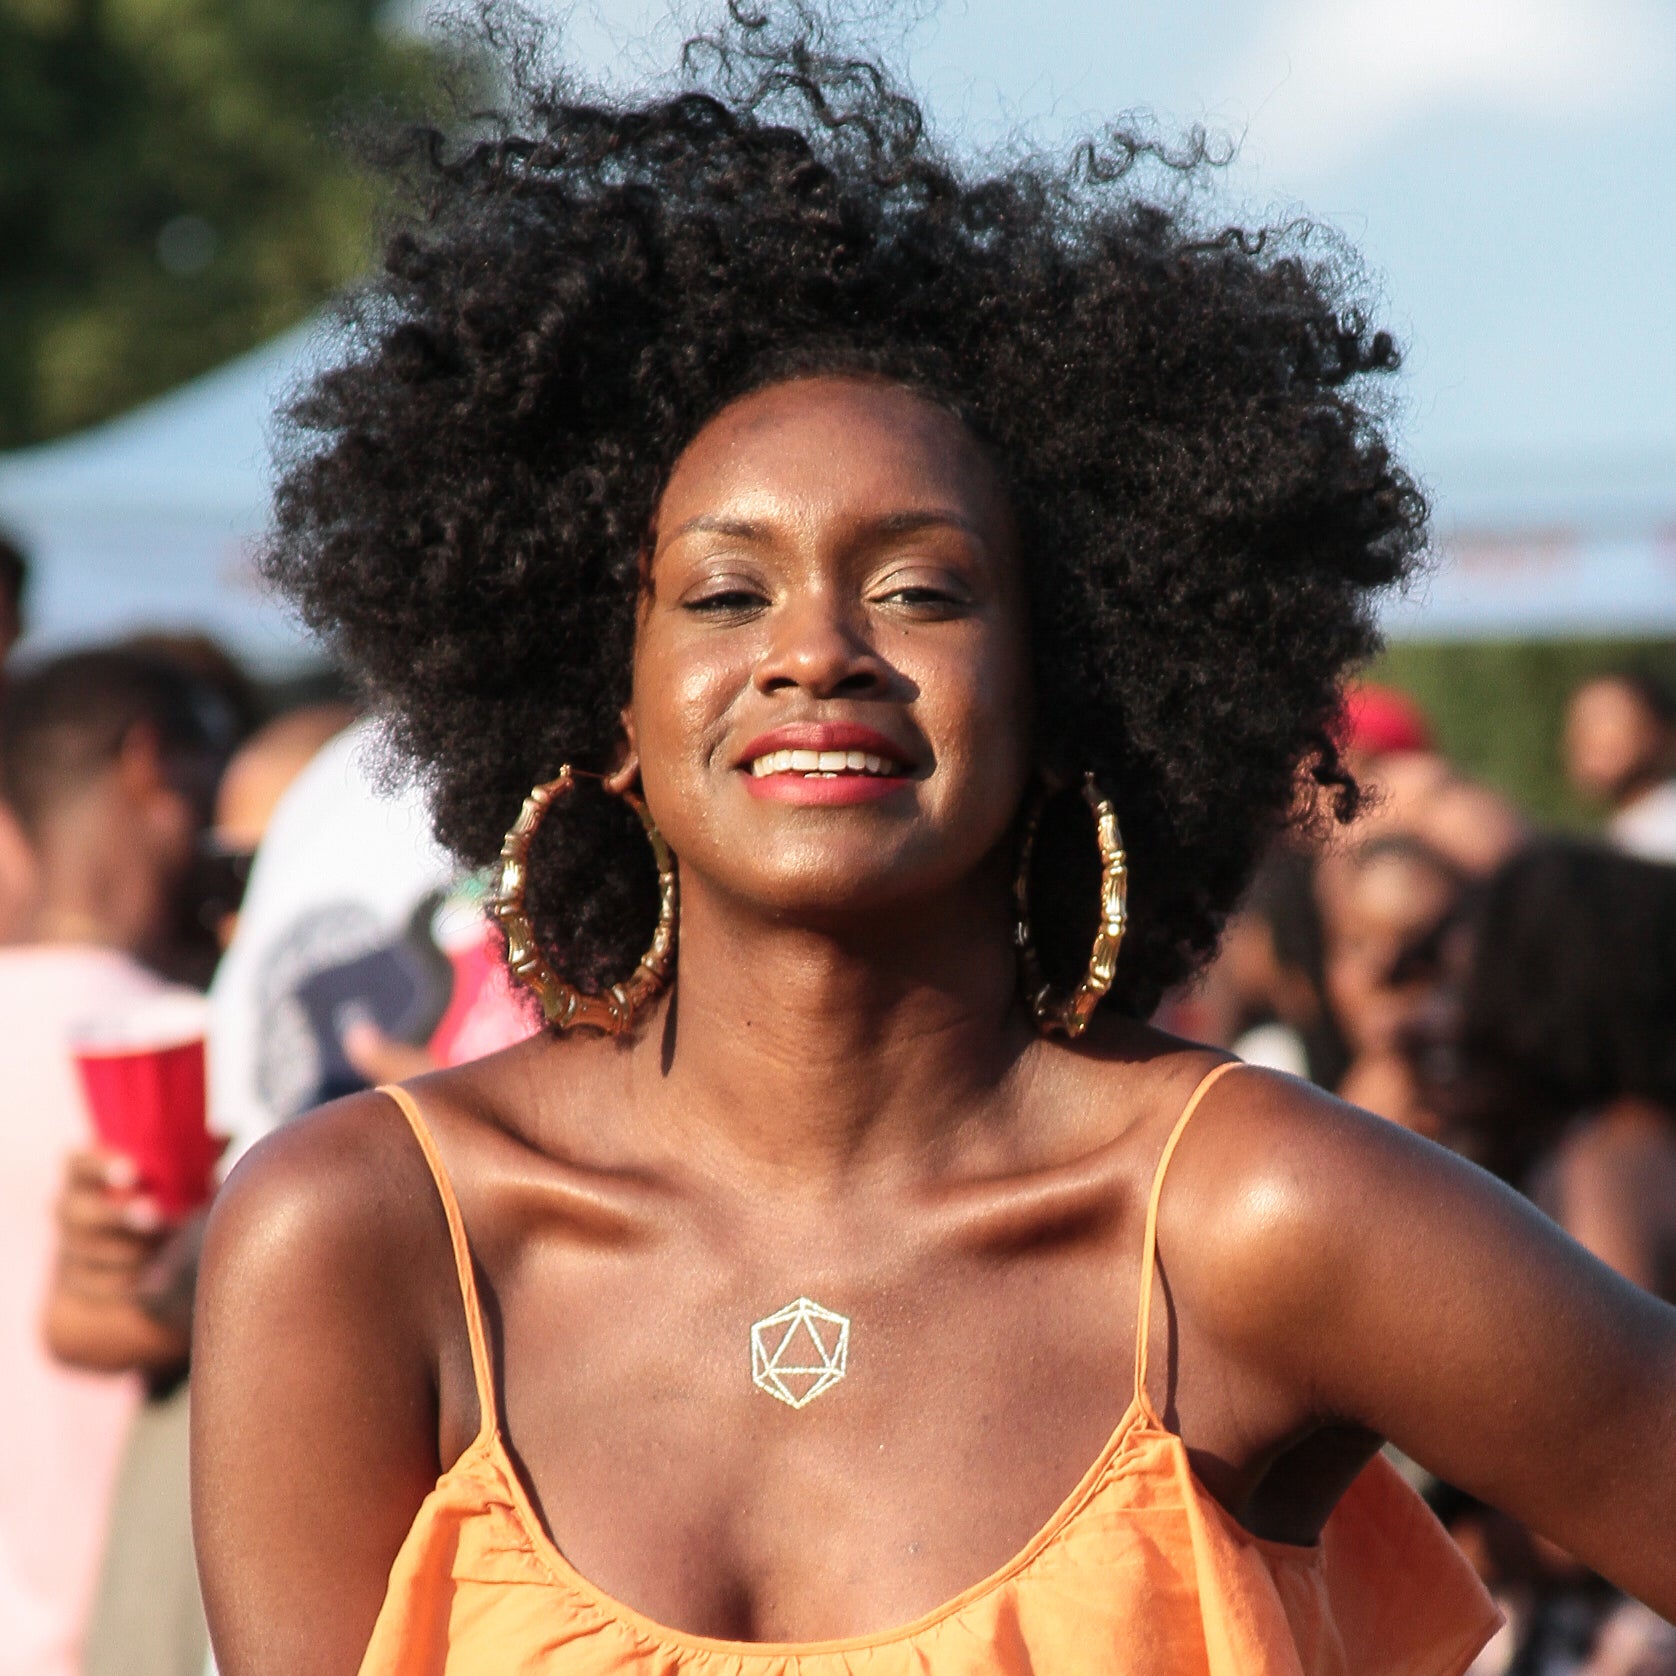 Check out all the Natural Hair Beauties at CURLFEST 2016
